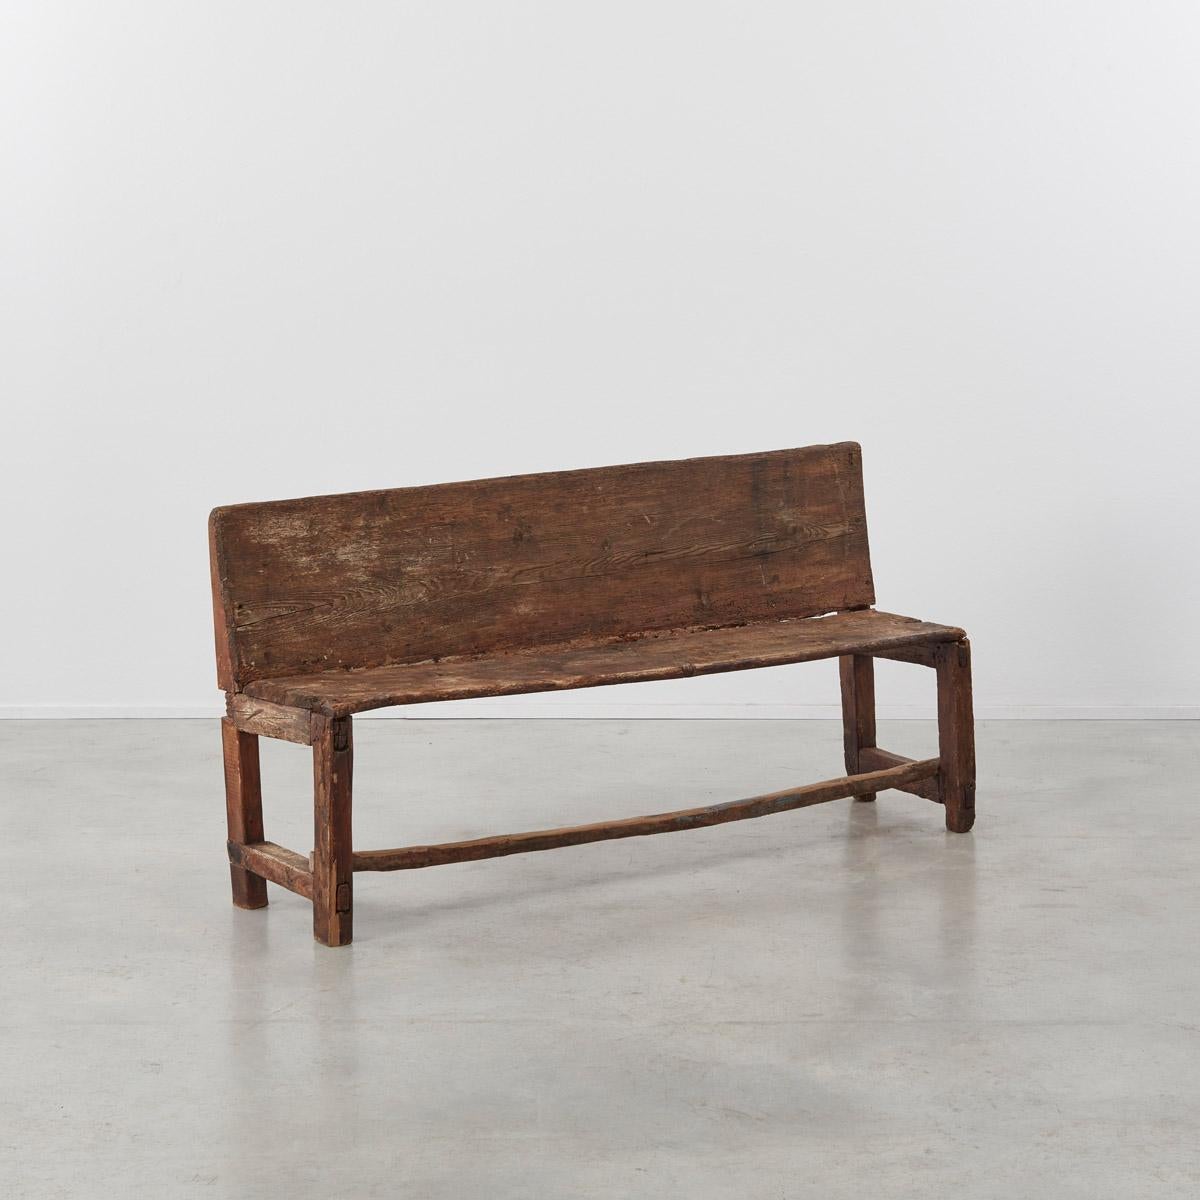 This simply made aged wooden bench from the Pyrenees has bags of patina. The surfaces of the wood show a gnarled and open grain, rich with history. It oozes Wabi Sabi.

Its structural integrity has been reduced over the years so it is perhaps best